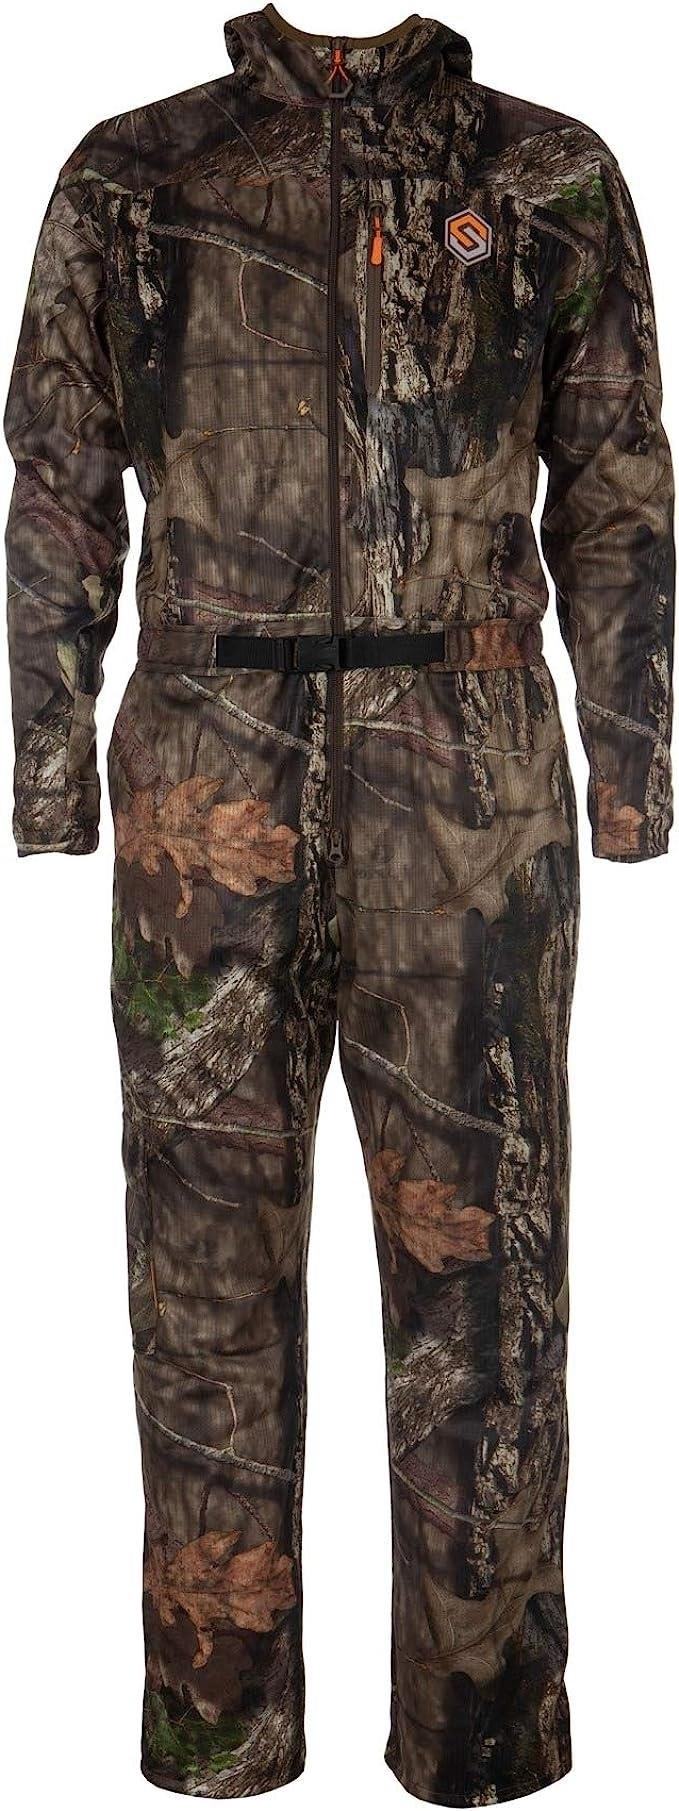 The Scentlok Savanna Aero Quickstrike Bowhunting Coverall is a high-performance camouflage garment designed specifically for bowhunters, featuring innovative Scentlok technology to eliminate odors and increase stealthiness in the field.